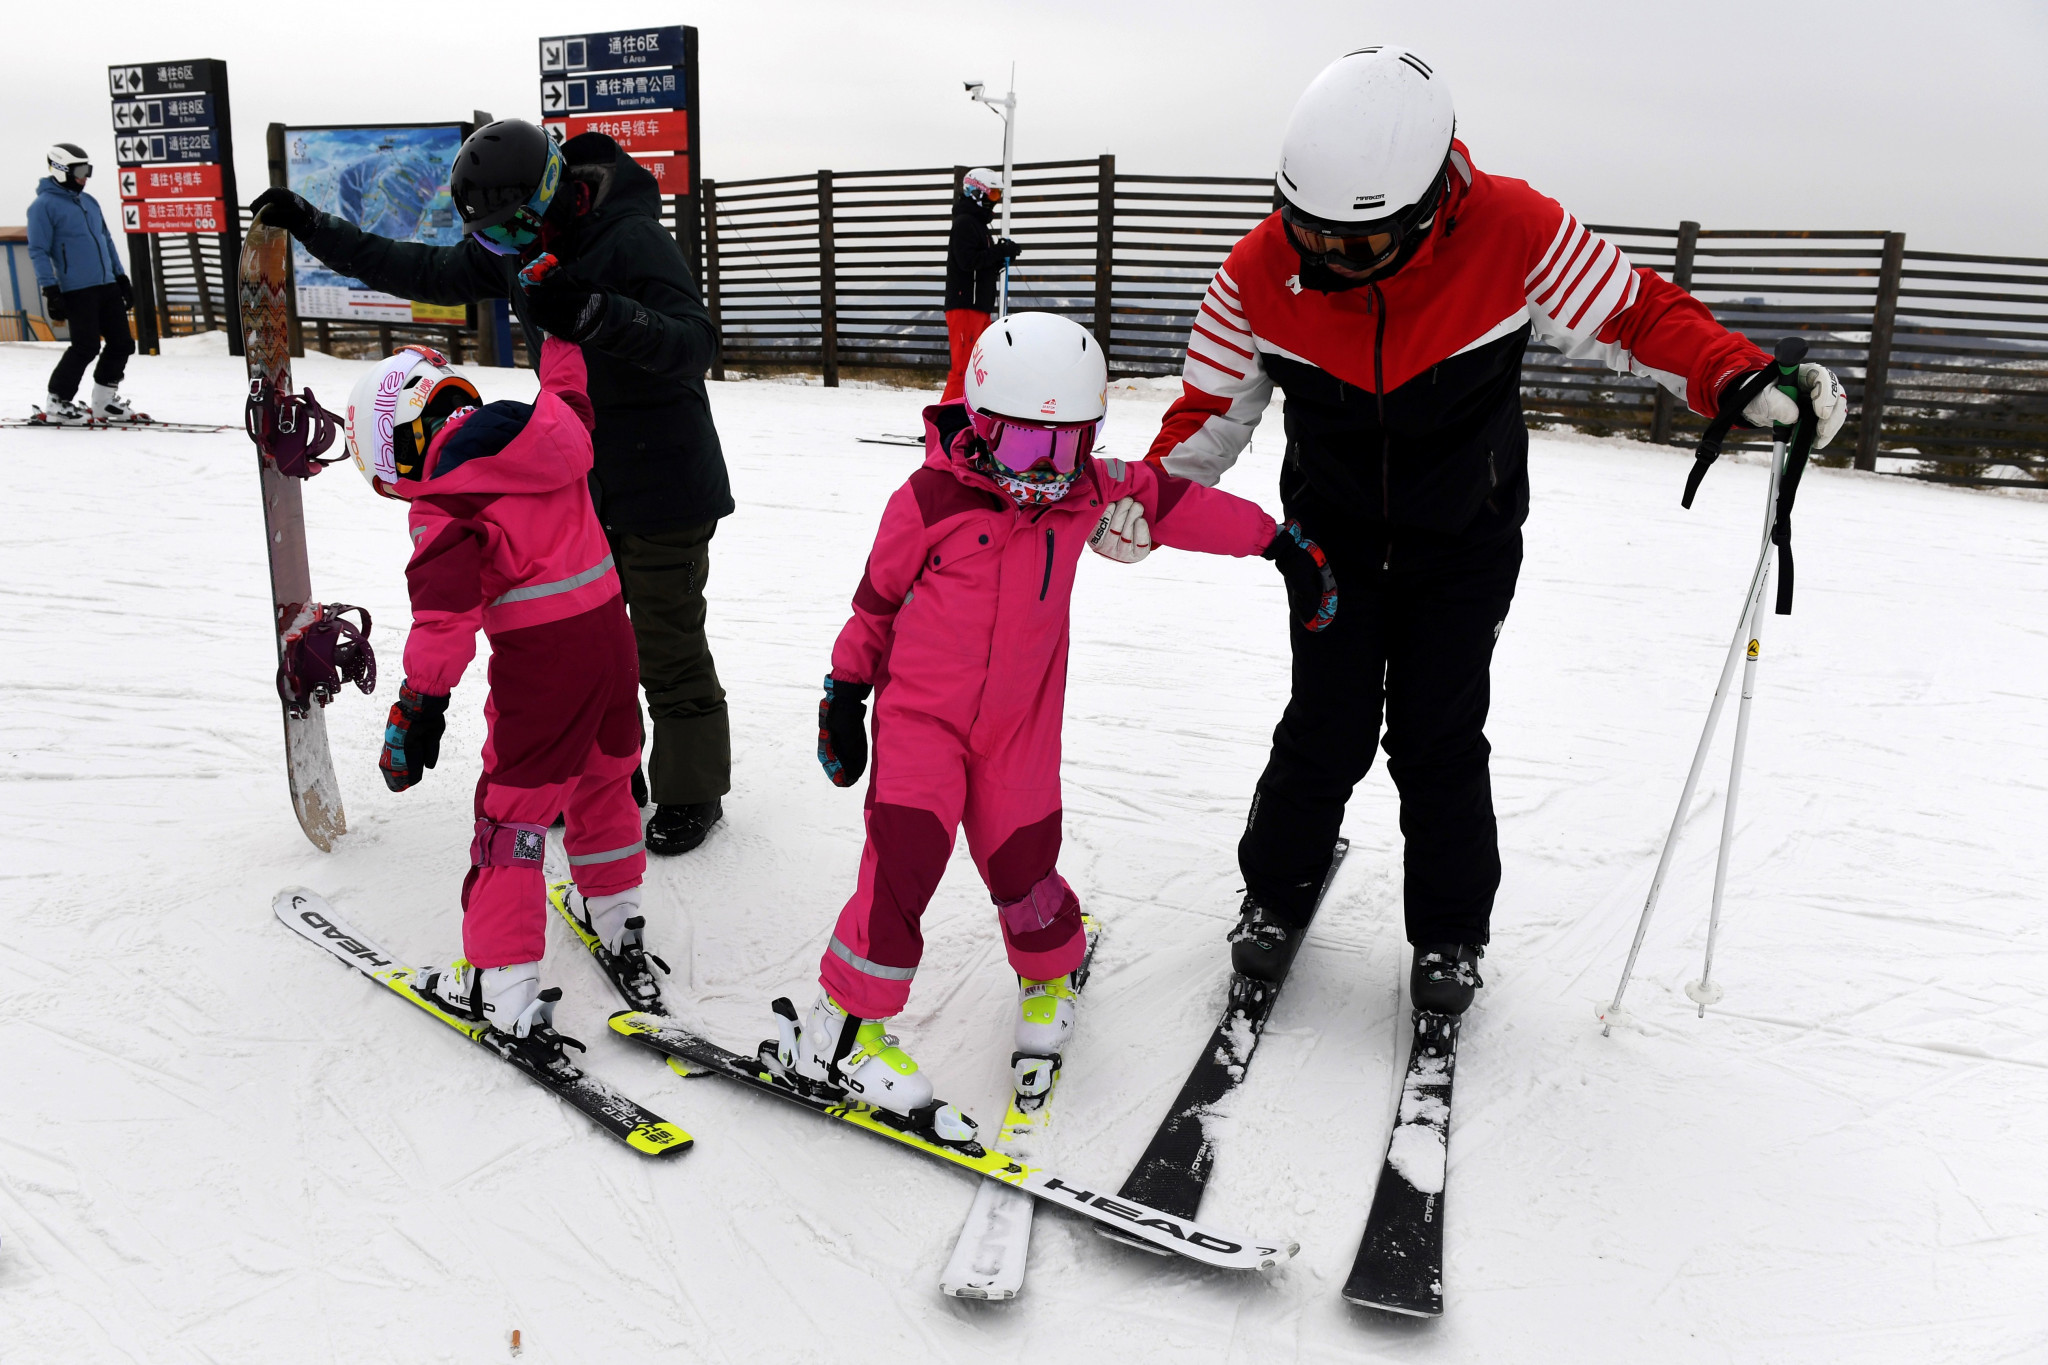 European ski school opens academy in China to capitalise on Beijing 2022 potential 